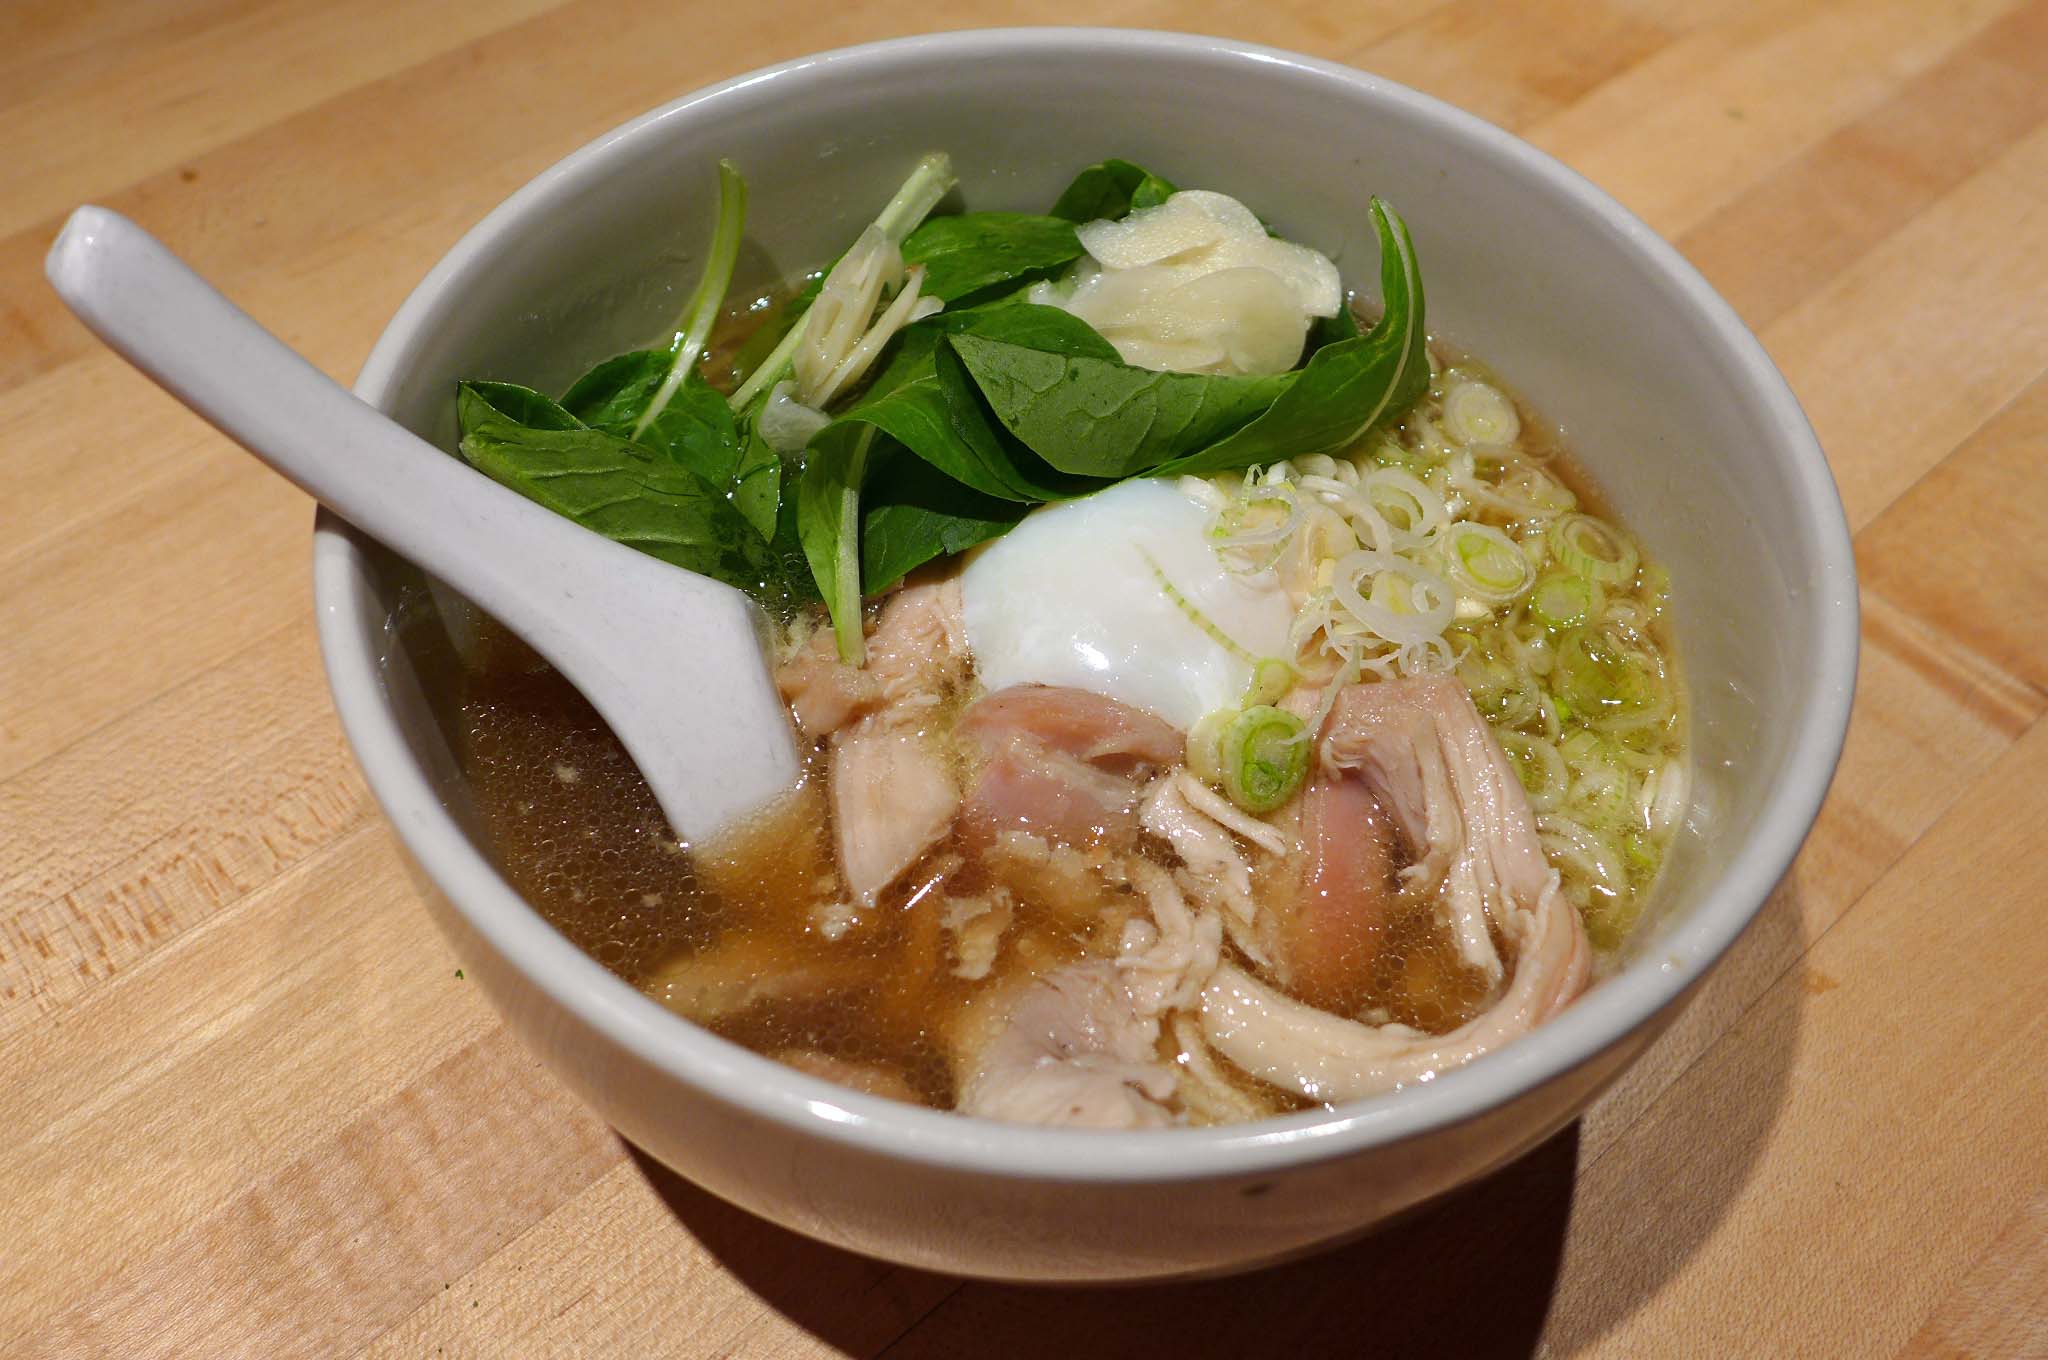 A bowl of medium brown broth with egg, raw spinach leaves, chicken, and noodles.